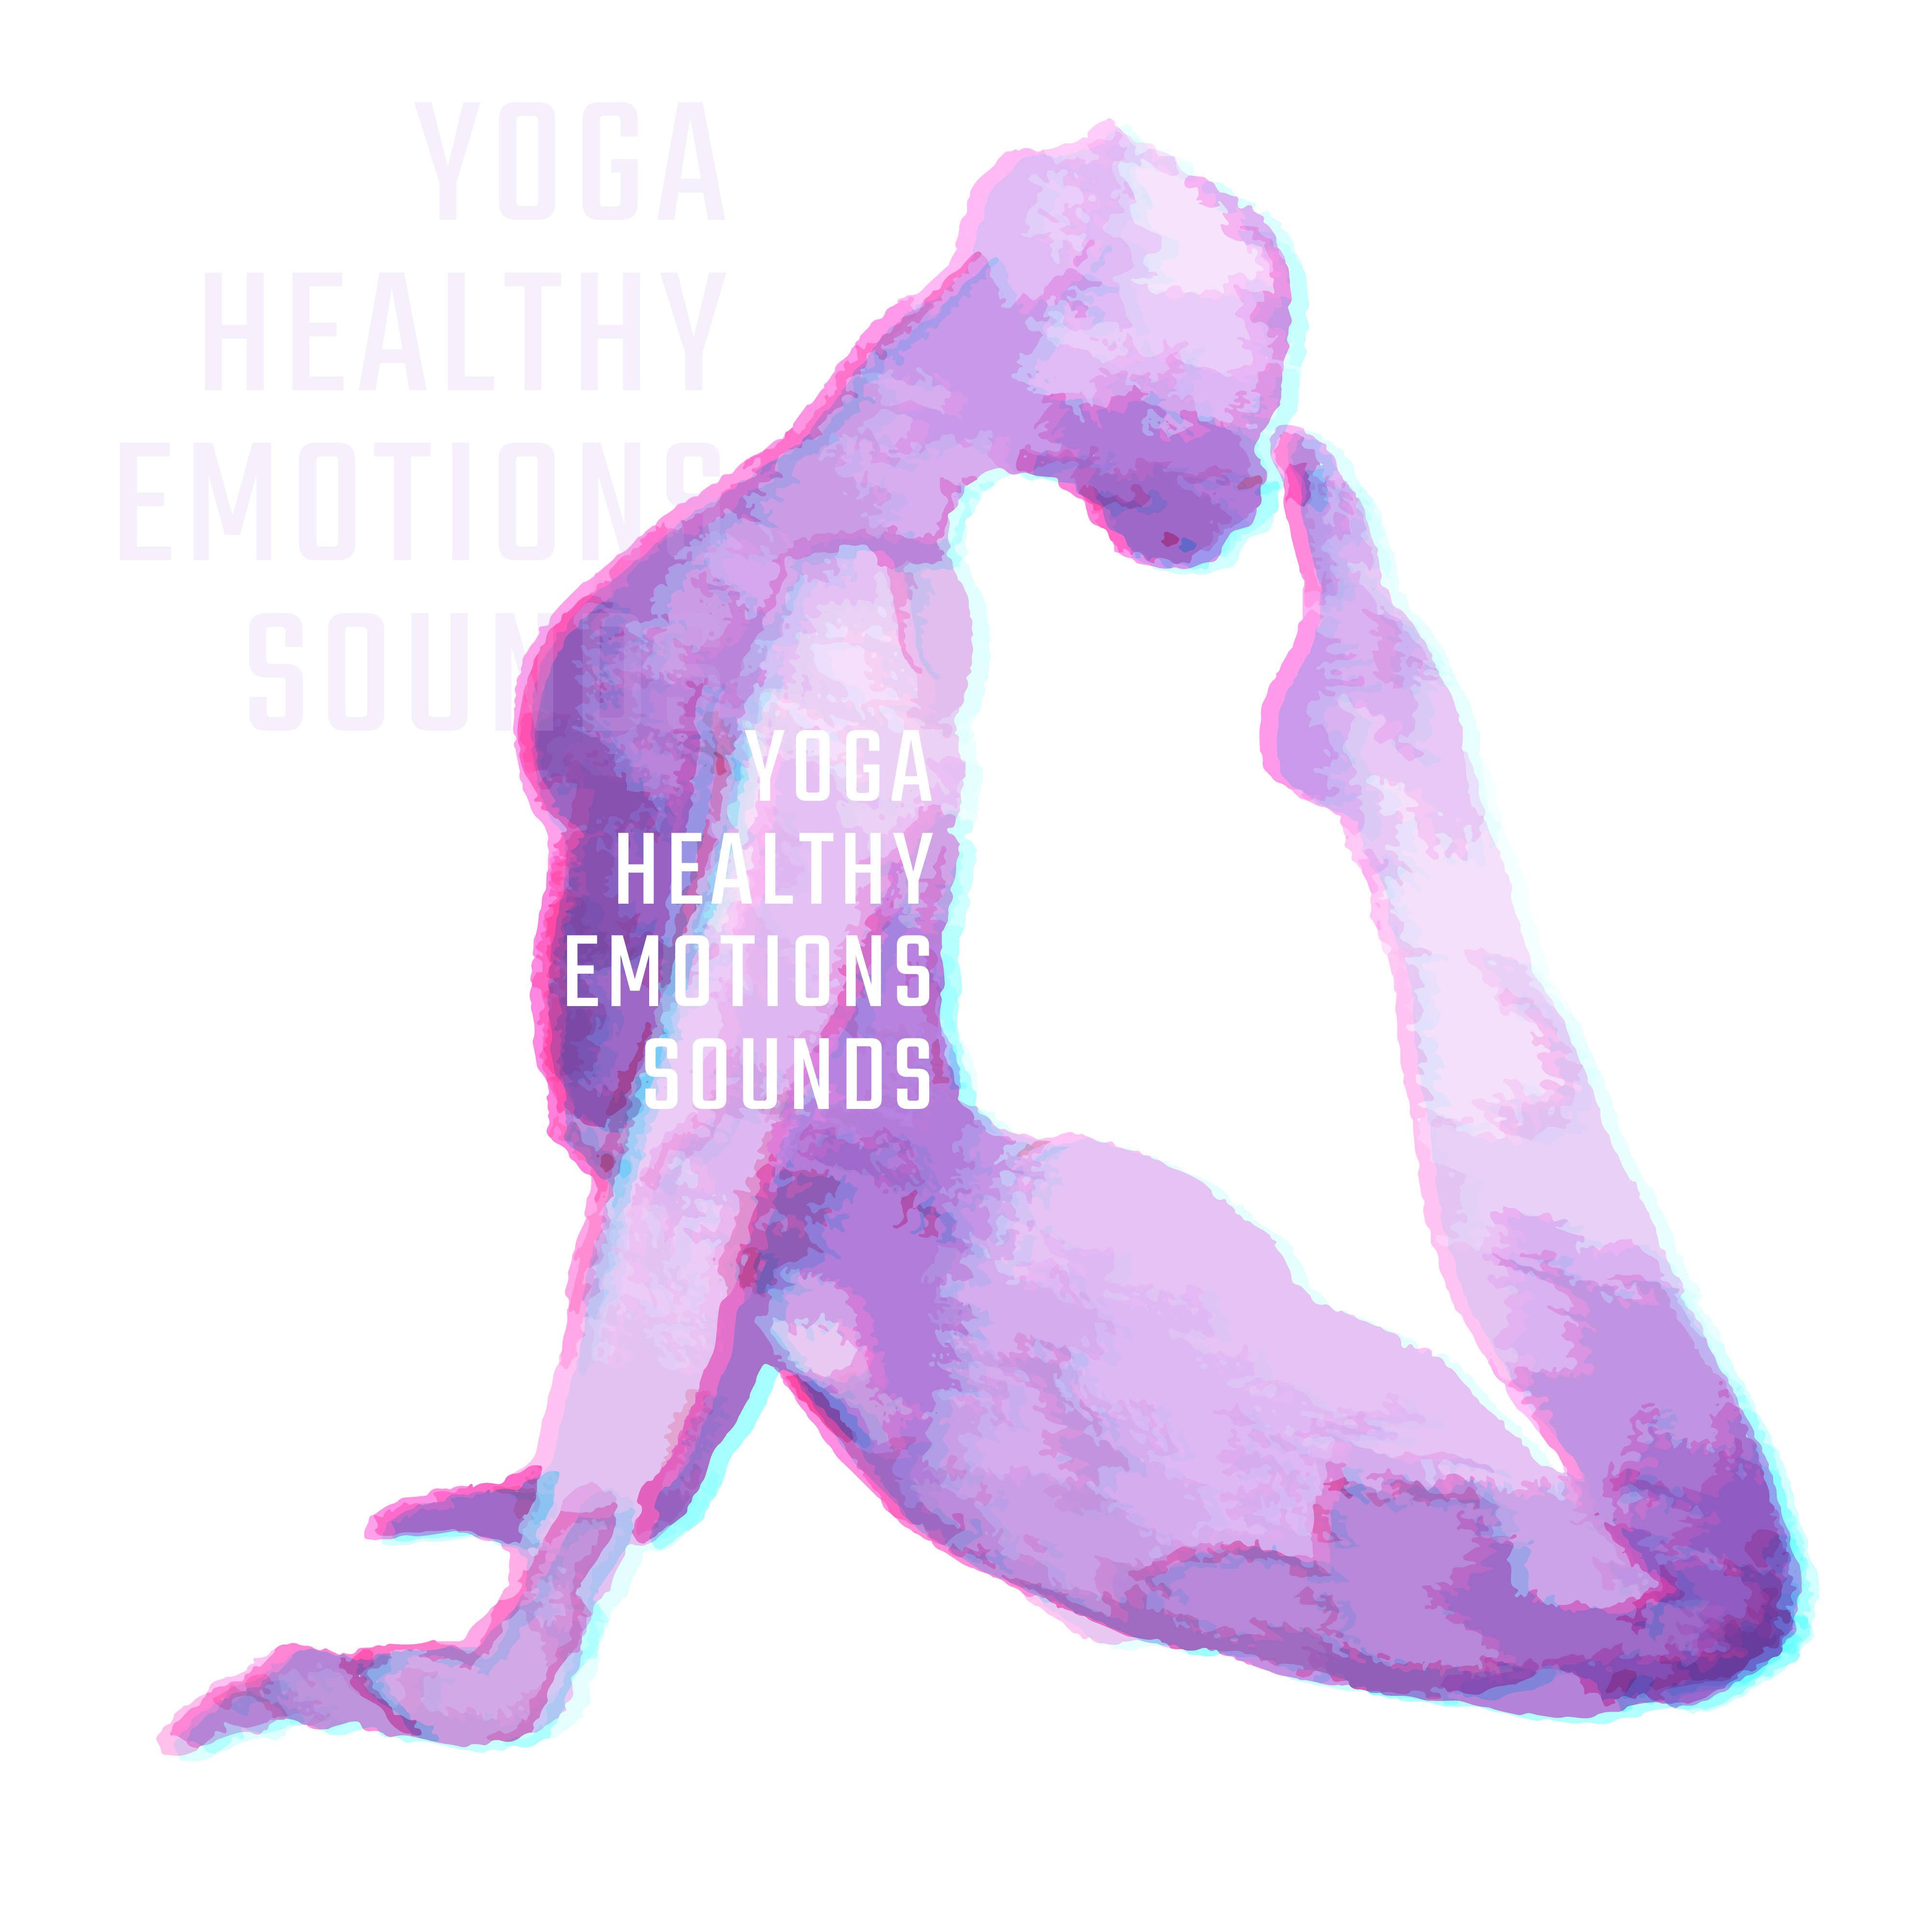 Yoga Healthy Emotions Sounds: New Age 2019 Fresh Music for Deep Meditation & Relaxation, Calming Down, Stress Relief Melodies, Spiritual Journey